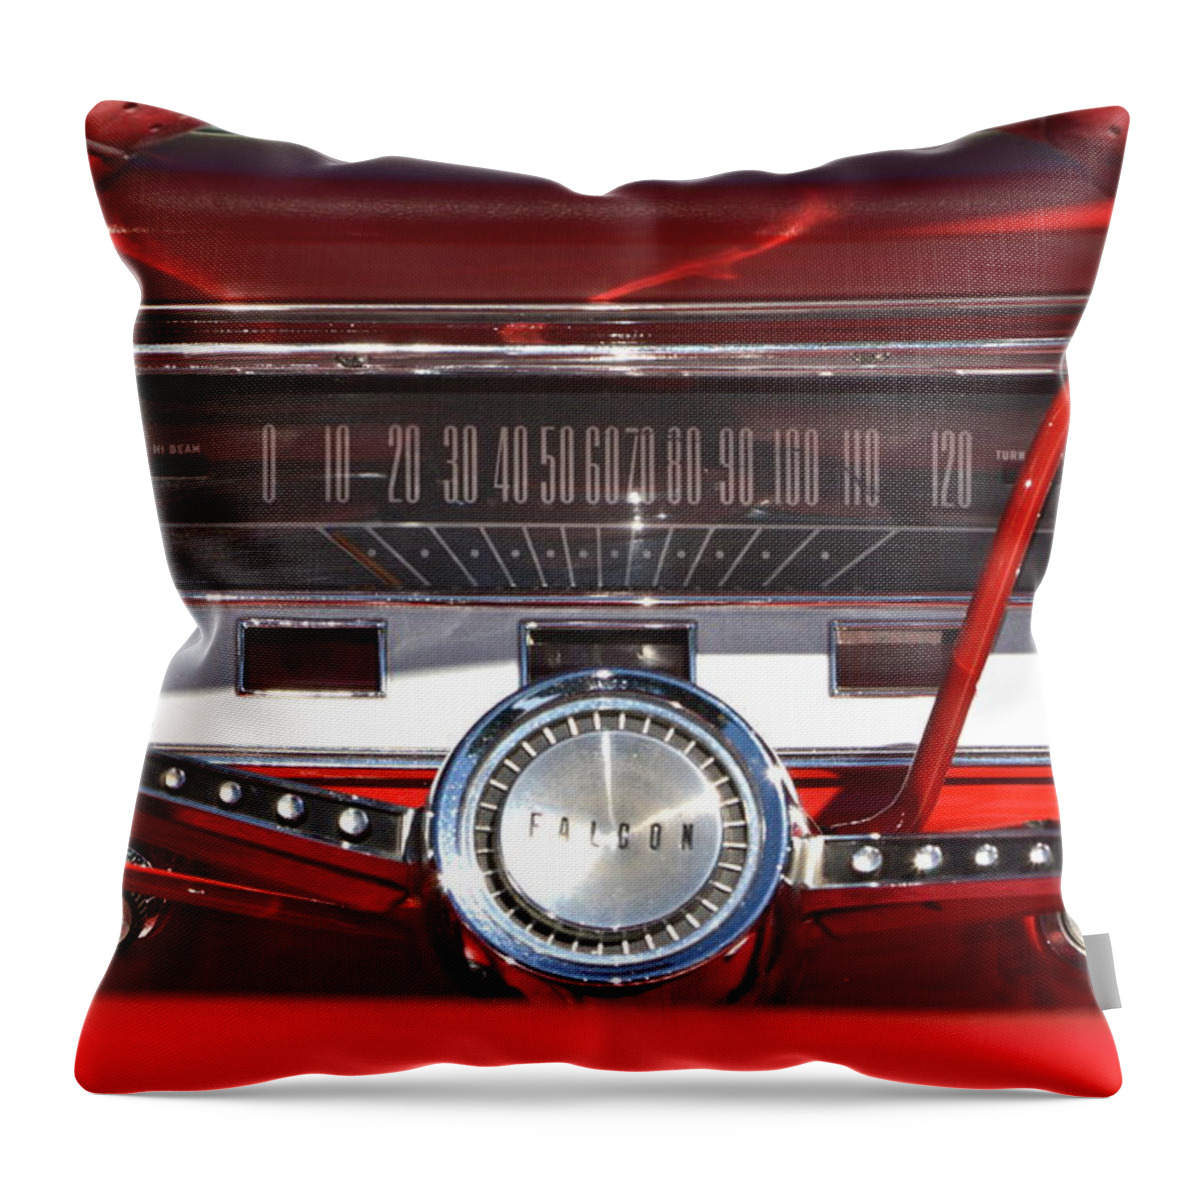 Red Throw Pillow featuring the photograph Ford Falcon Dash by Dean Ferreira